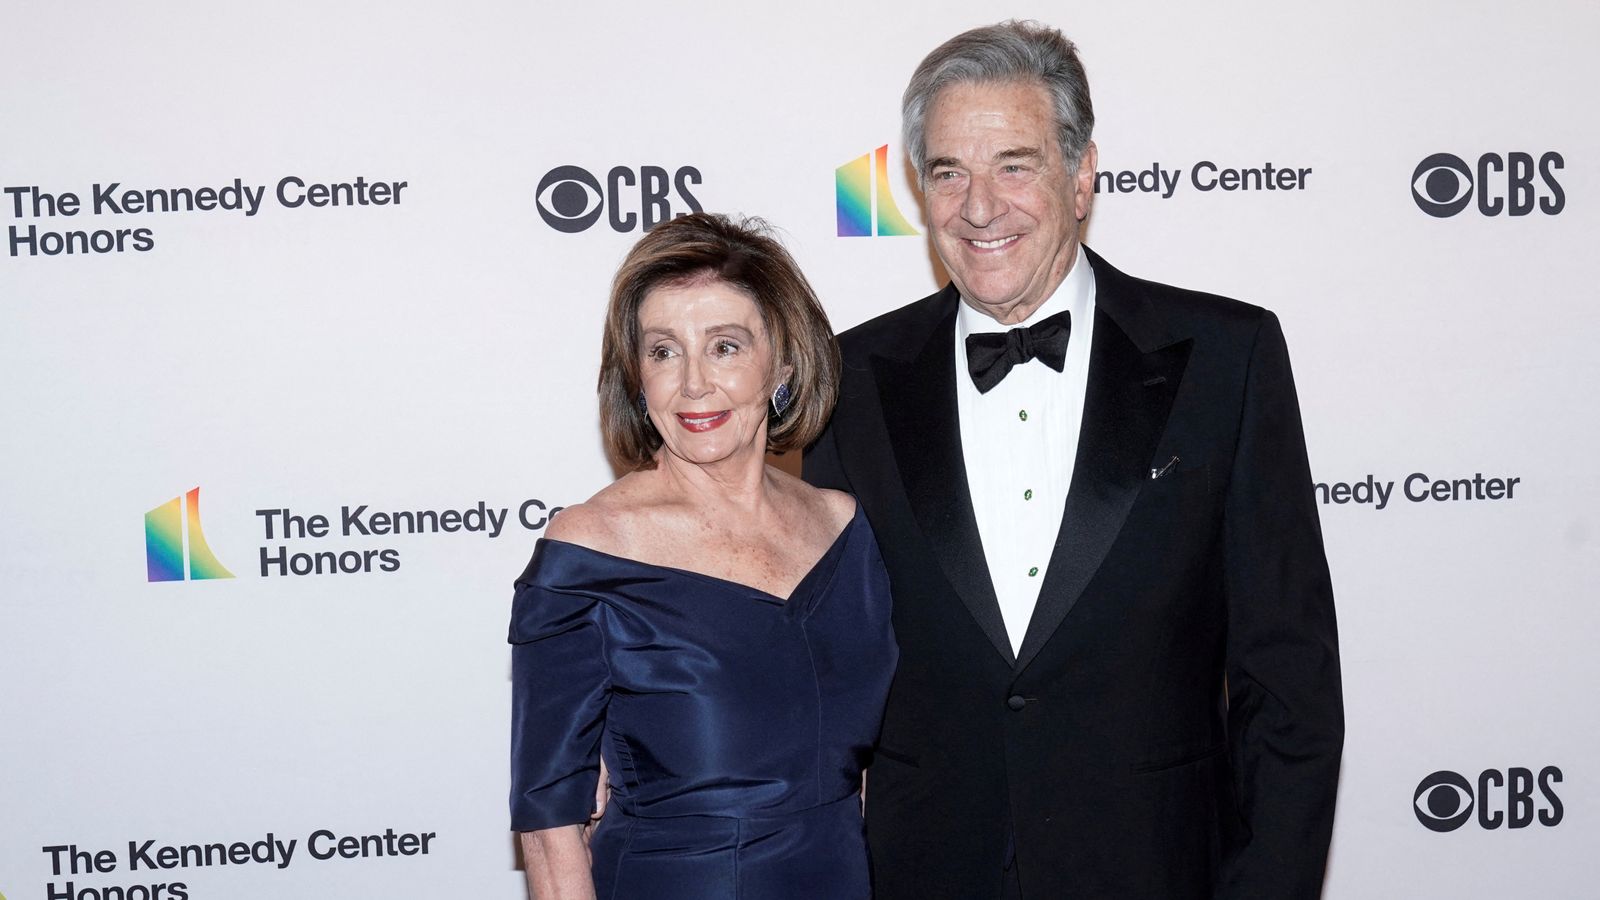 Attack on Nancy Pelosi's husband comes amid increasing threats against US politicians